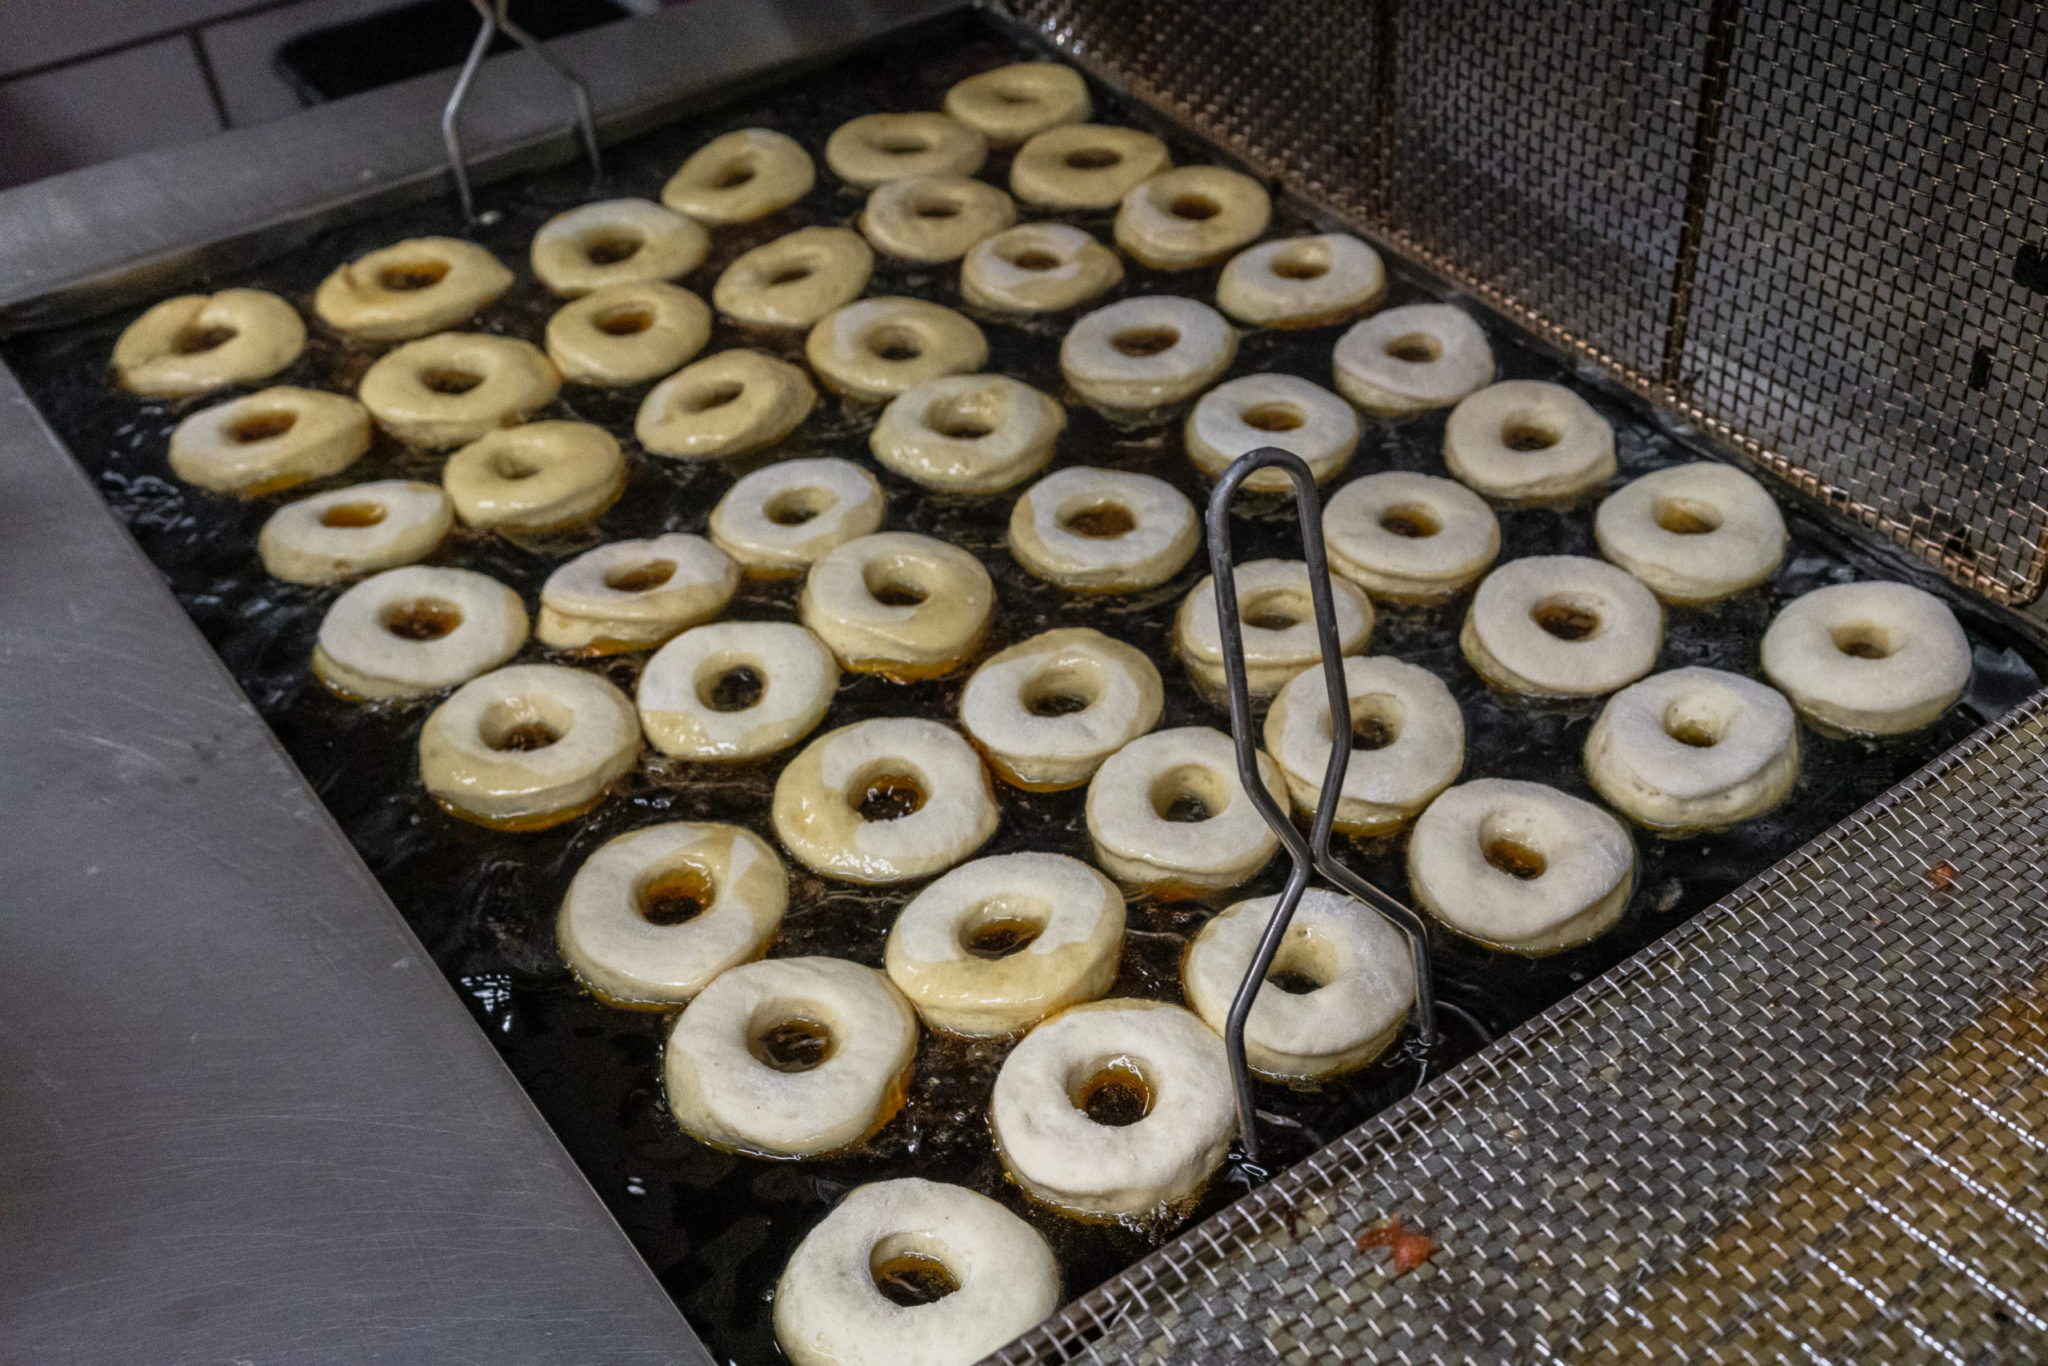 Donut being fired